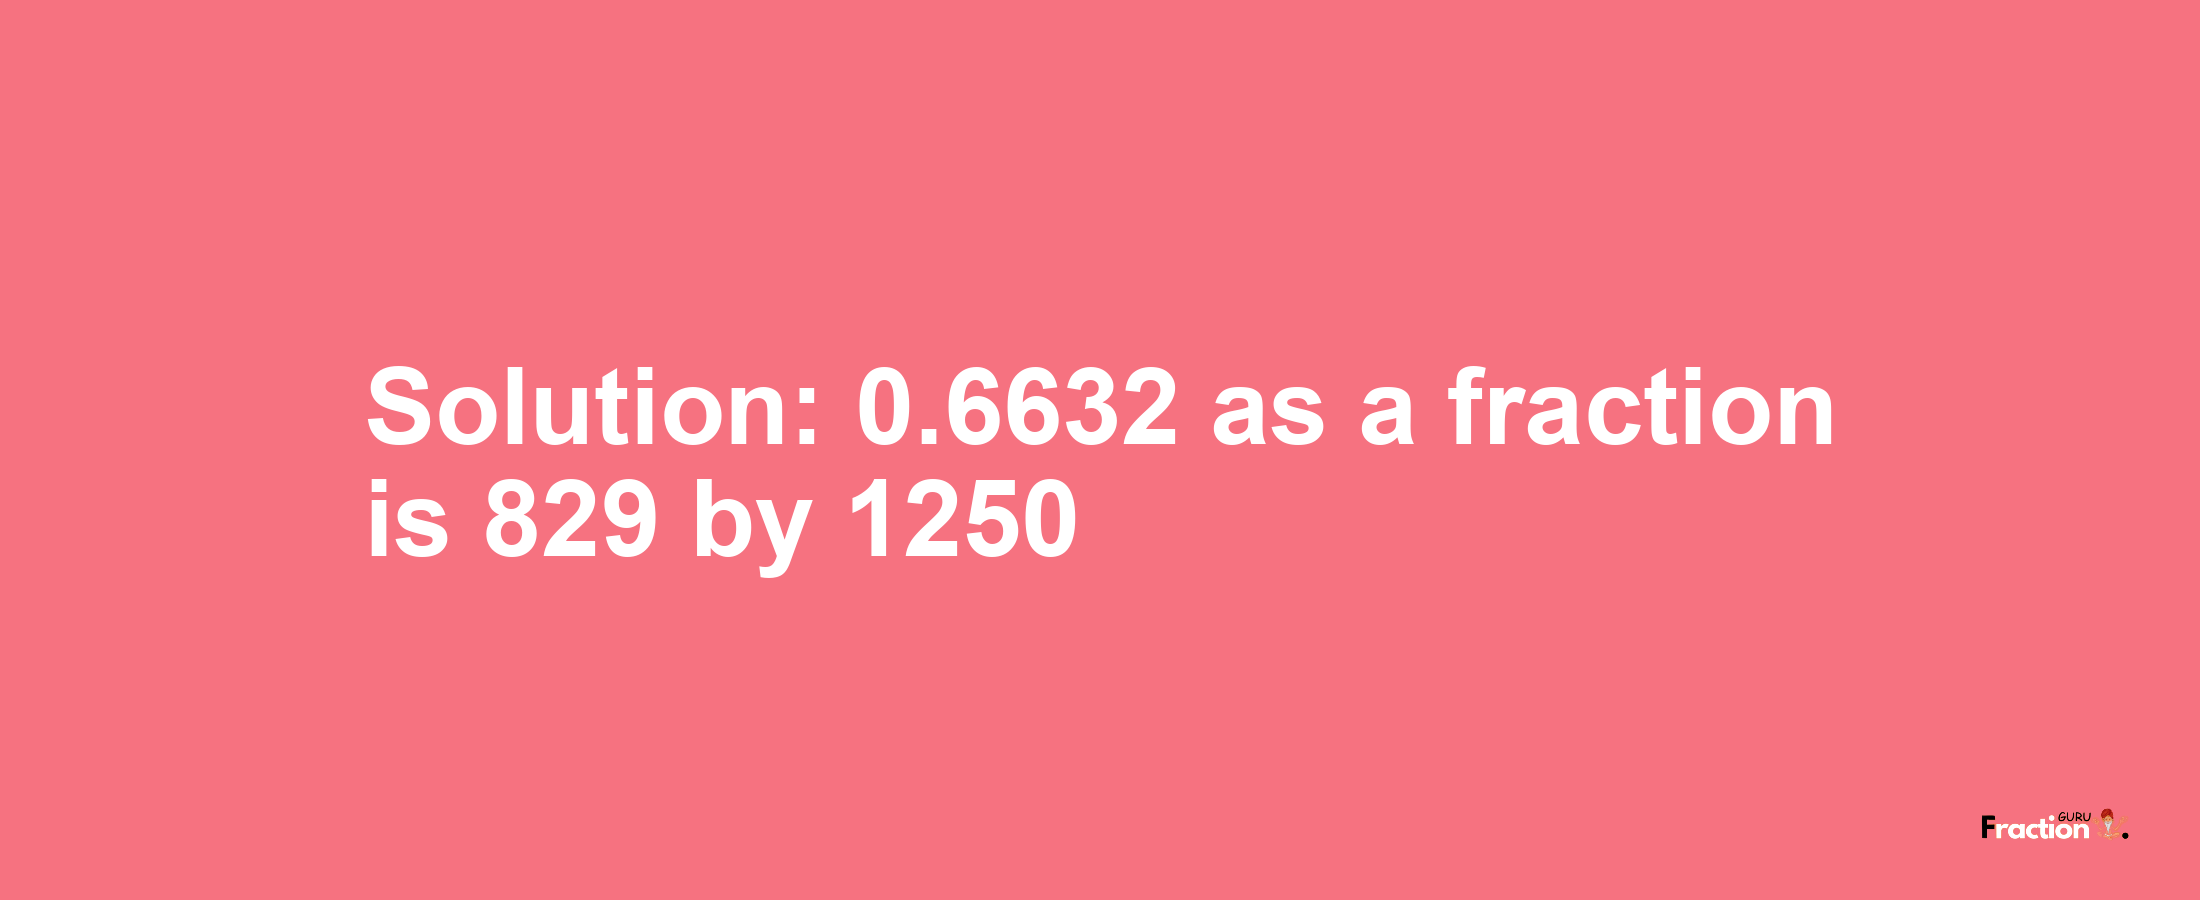 Solution:0.6632 as a fraction is 829/1250